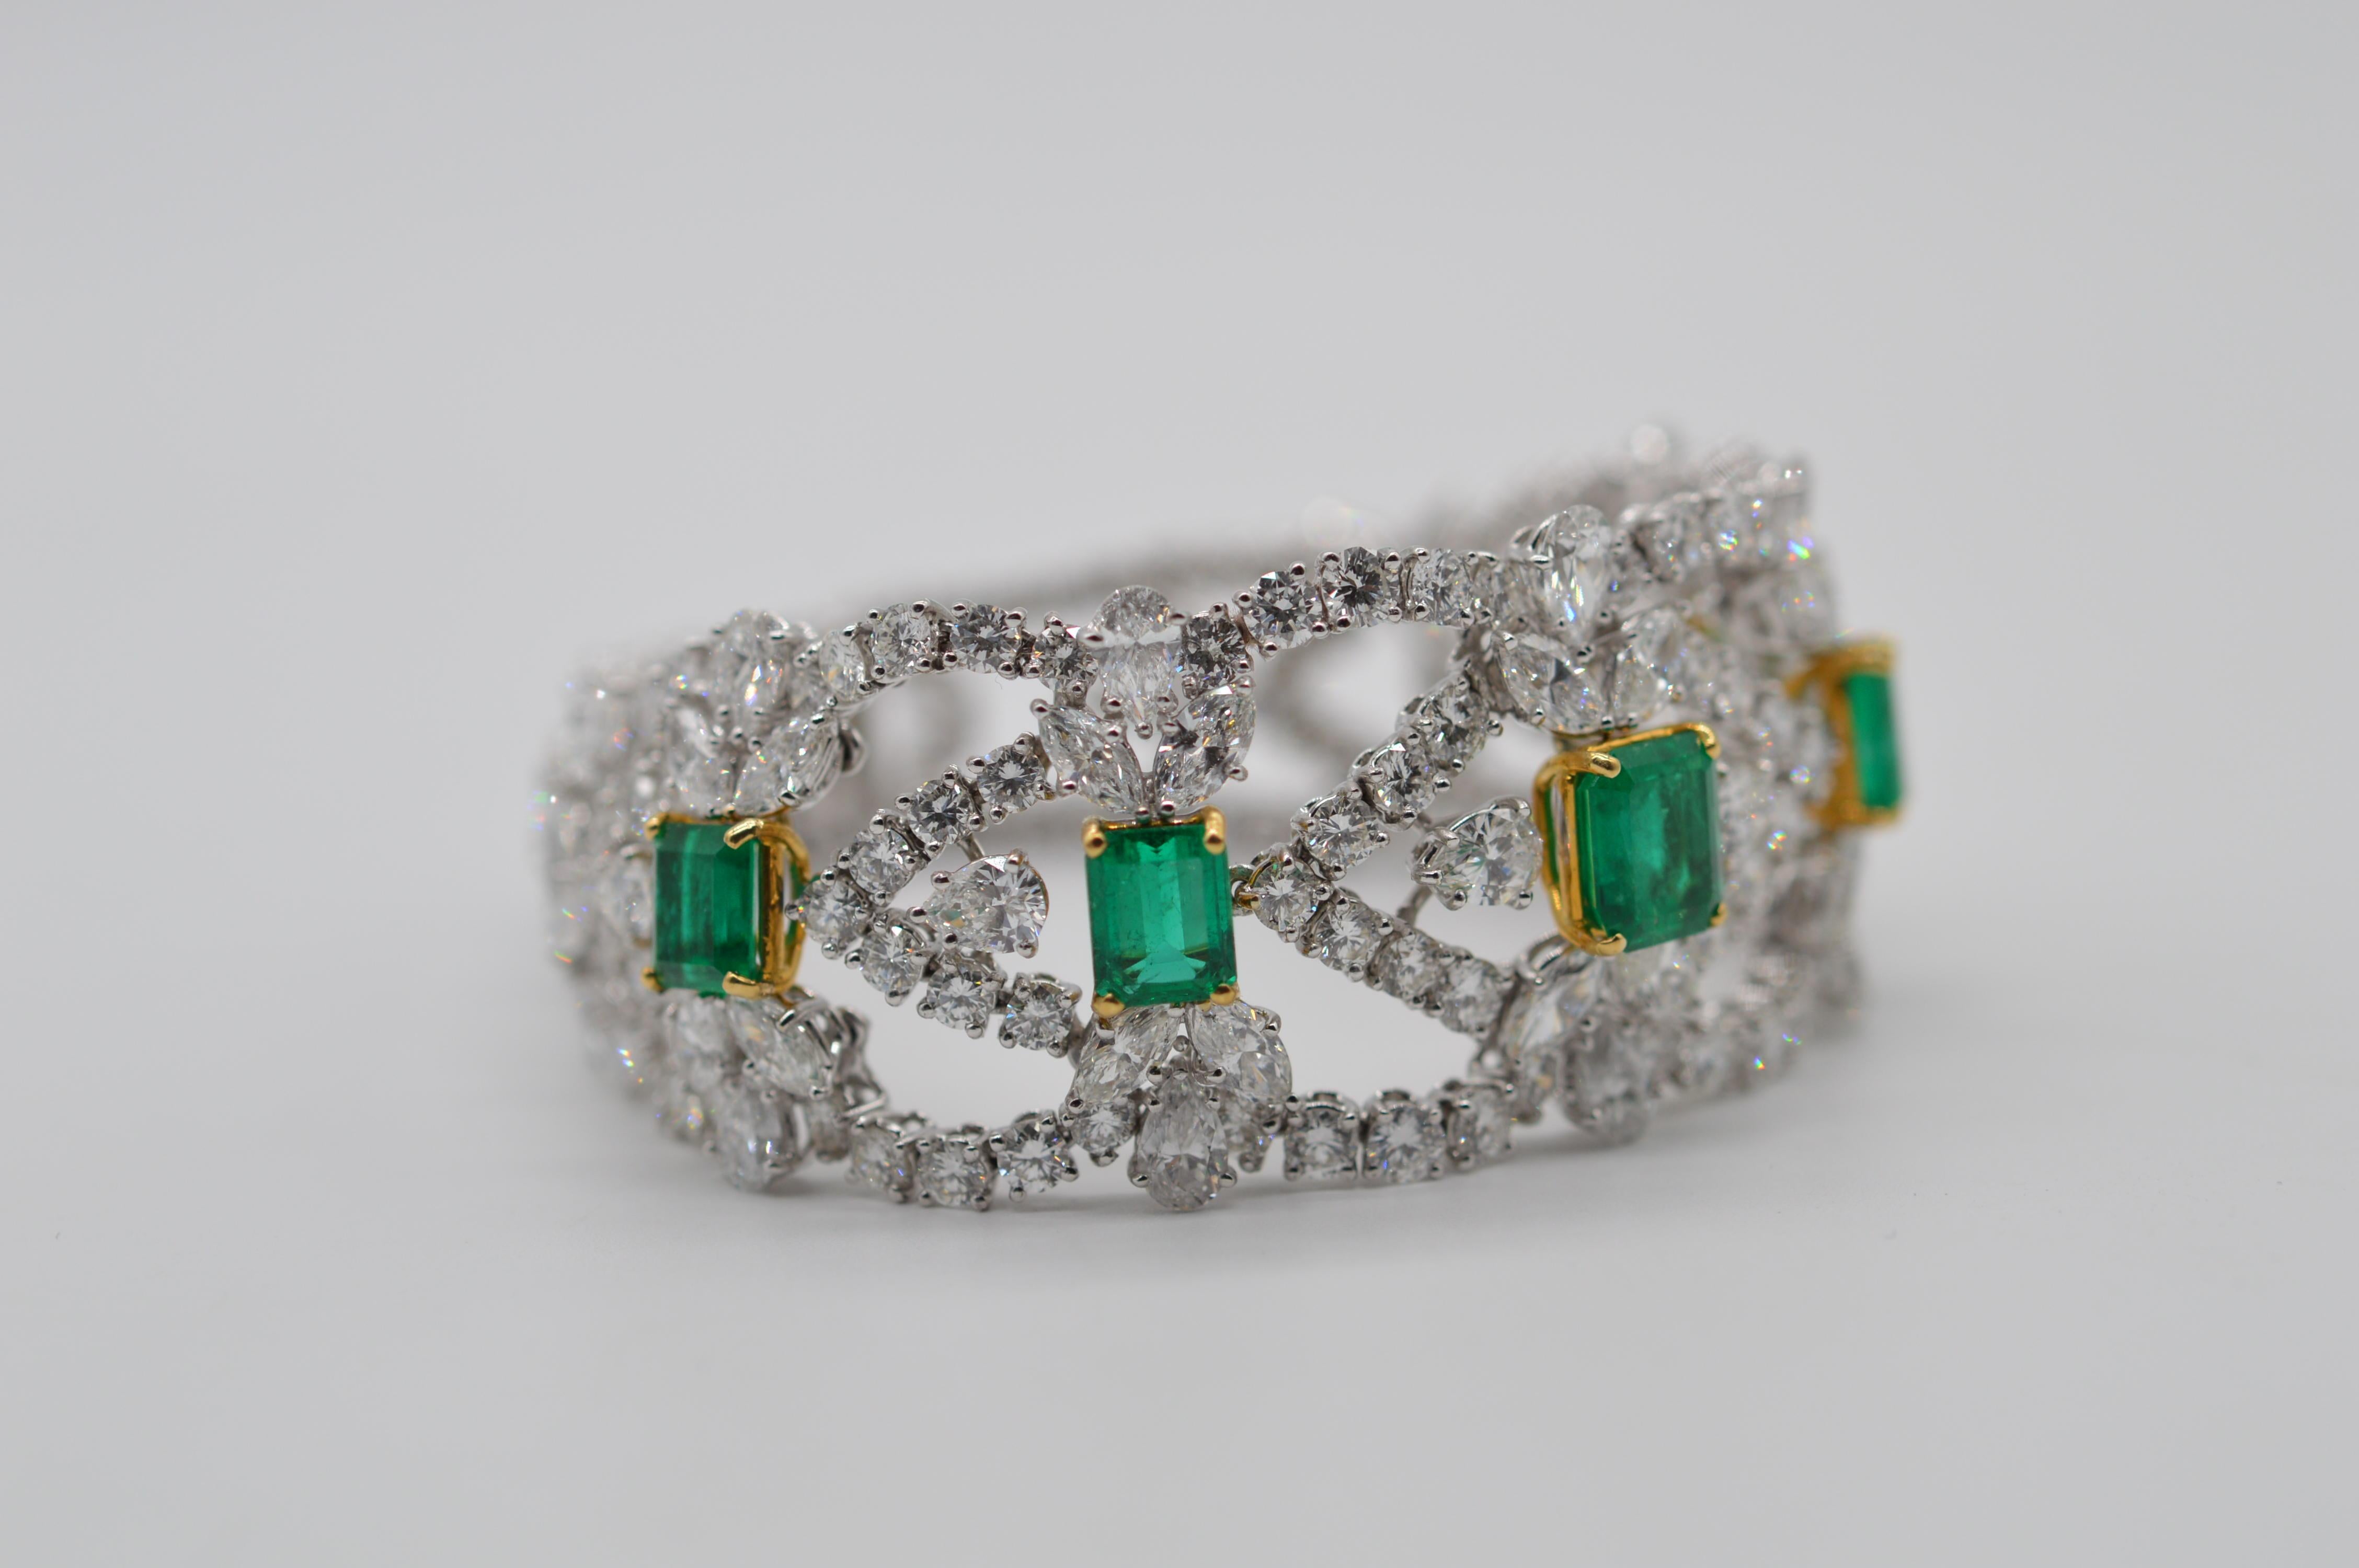 Magnificent Colombian Emerald & Diamonds Set in 18K White & Yellow Gold Unworn For Sale 7